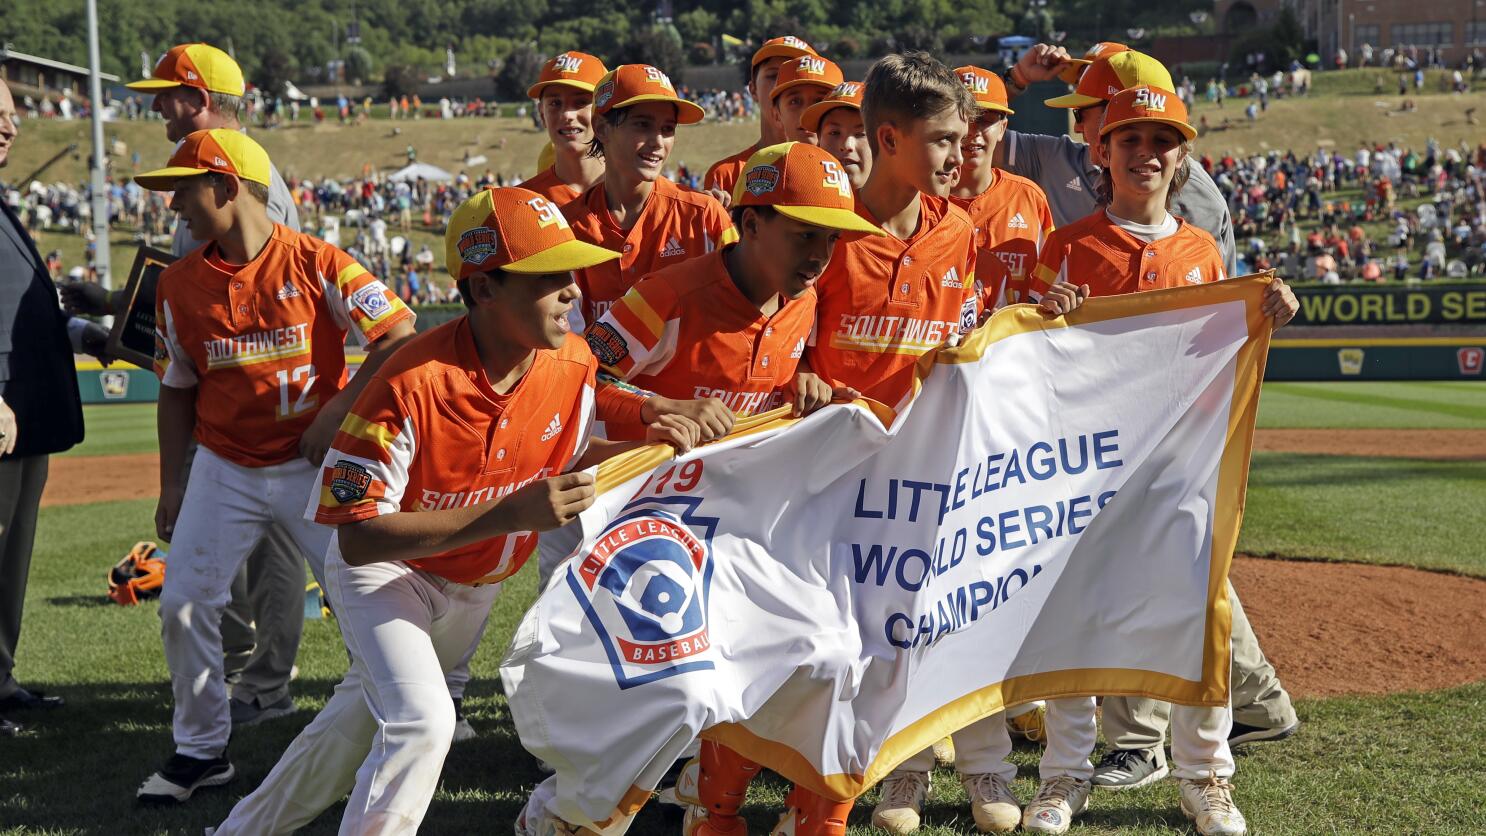 Louisiana wins first Little League World Series title - Los Angeles Times